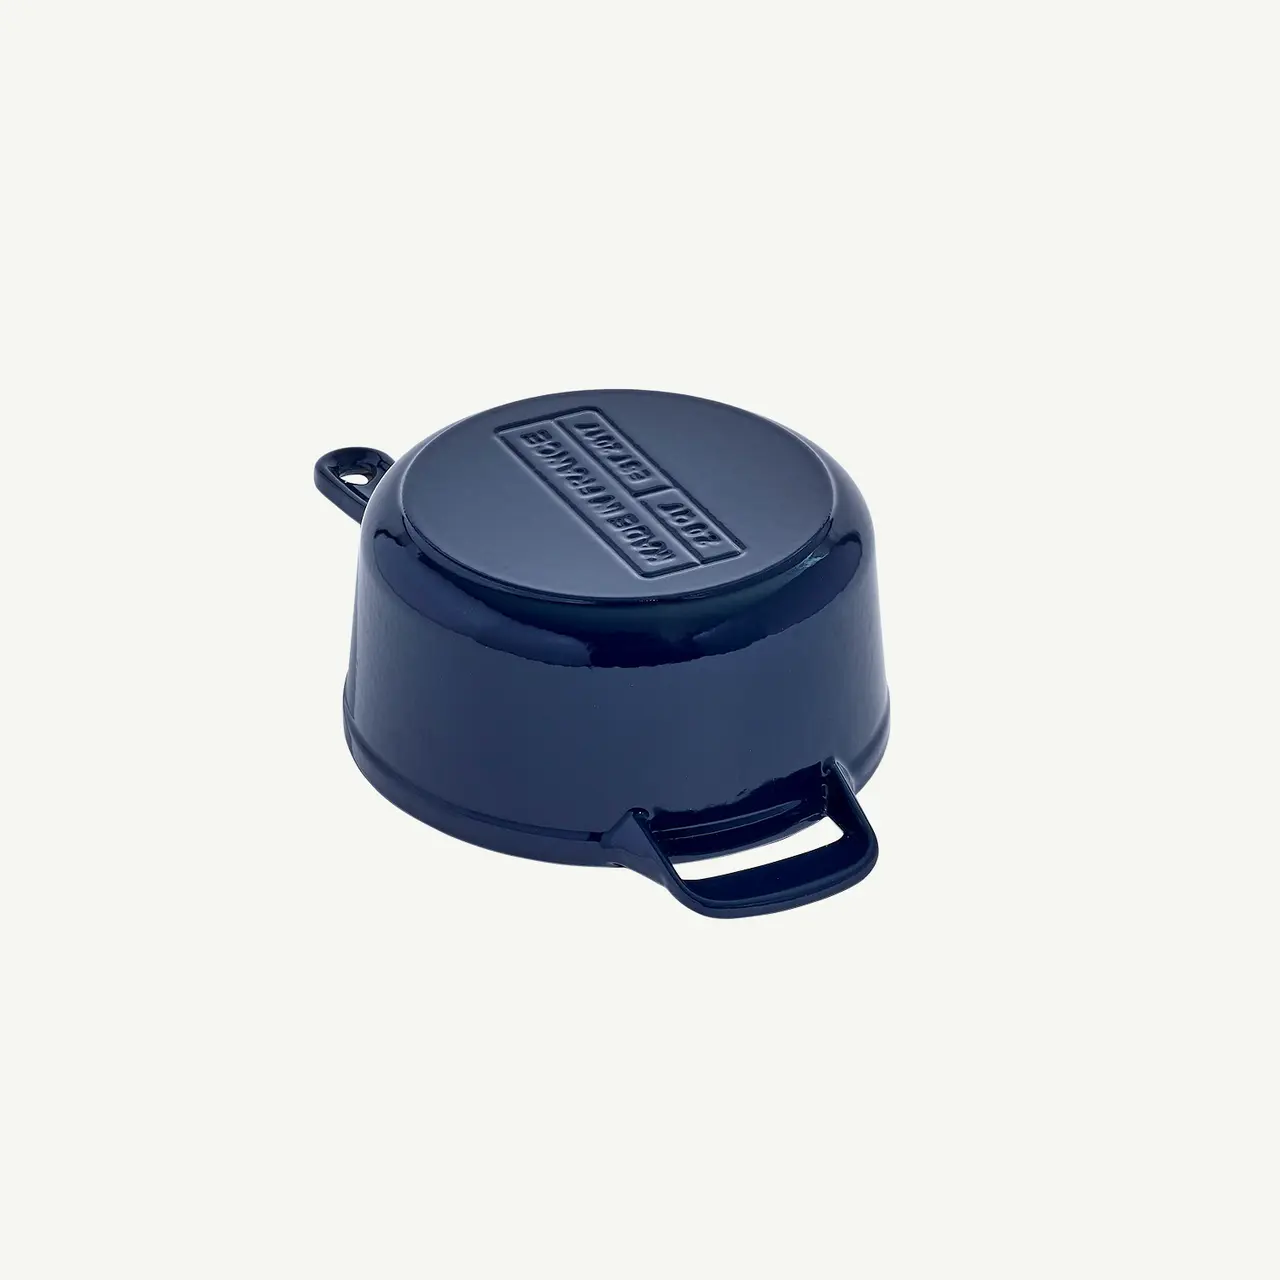 A navy blue saucepan with a lid and handles appears against a white background.